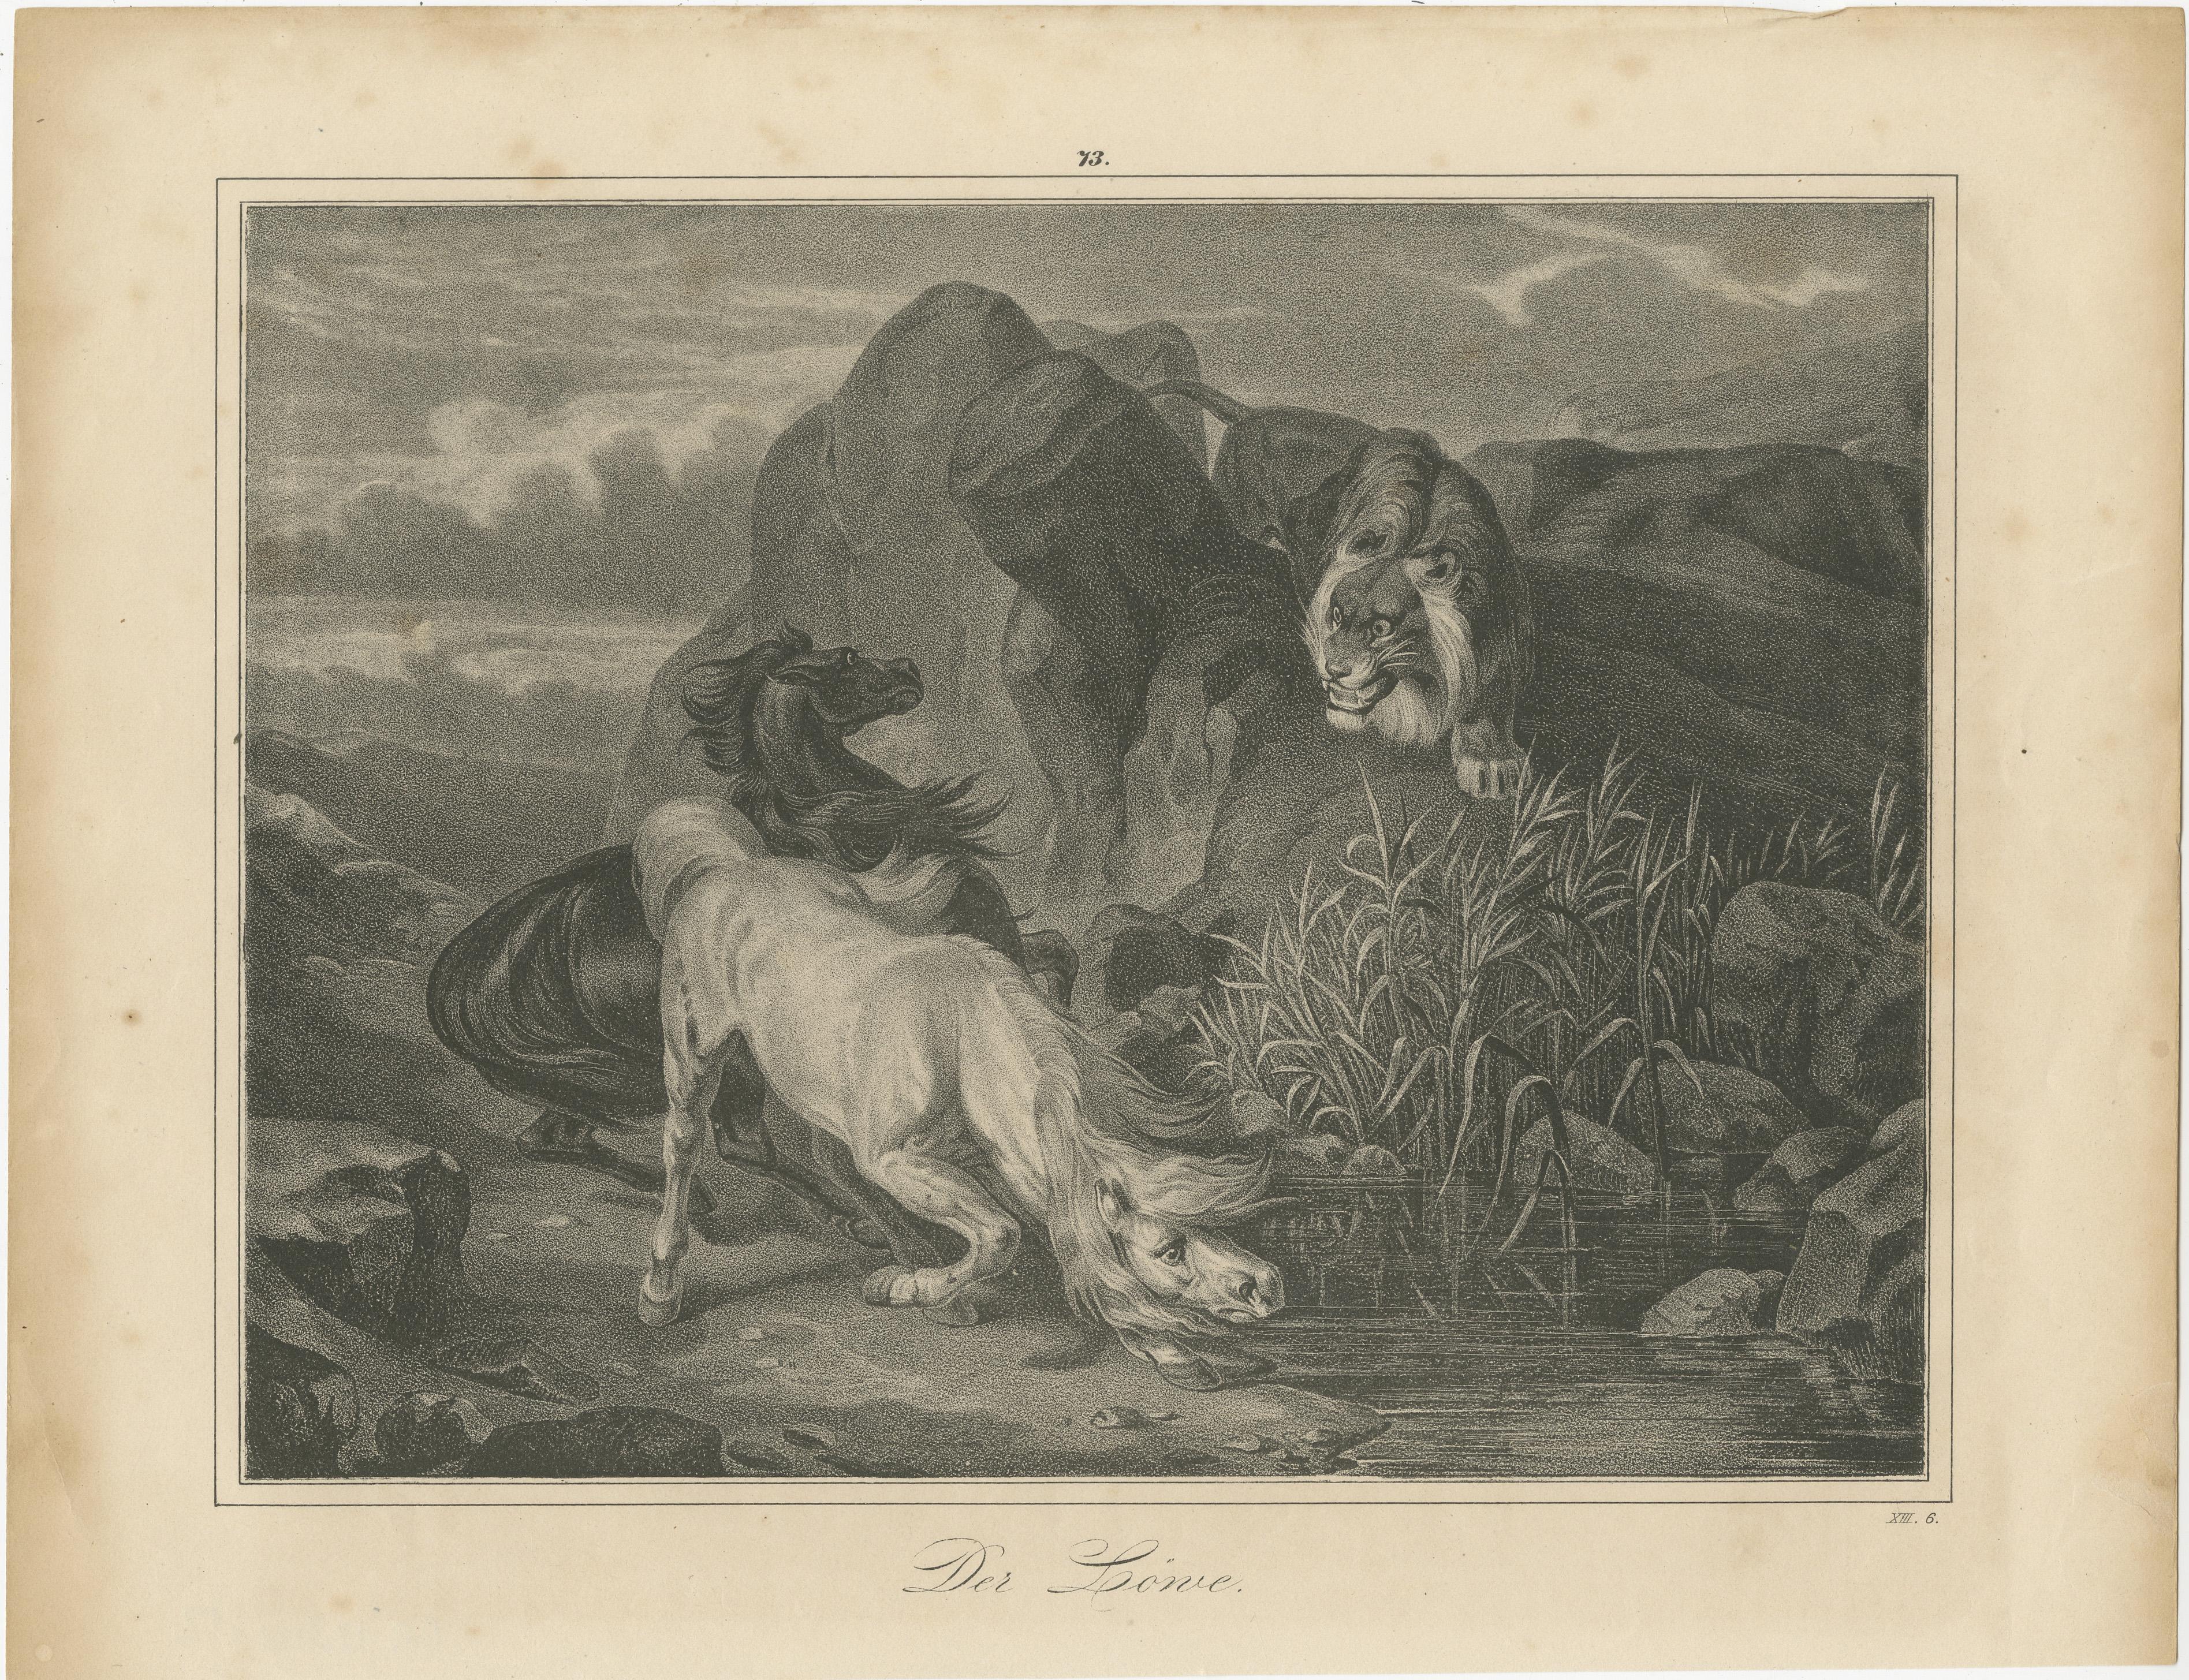 Antique print titled 'Der Löwe'. Old print of a lion sneaking up on horses. Source unknown, to be determined. Published circa 1890.